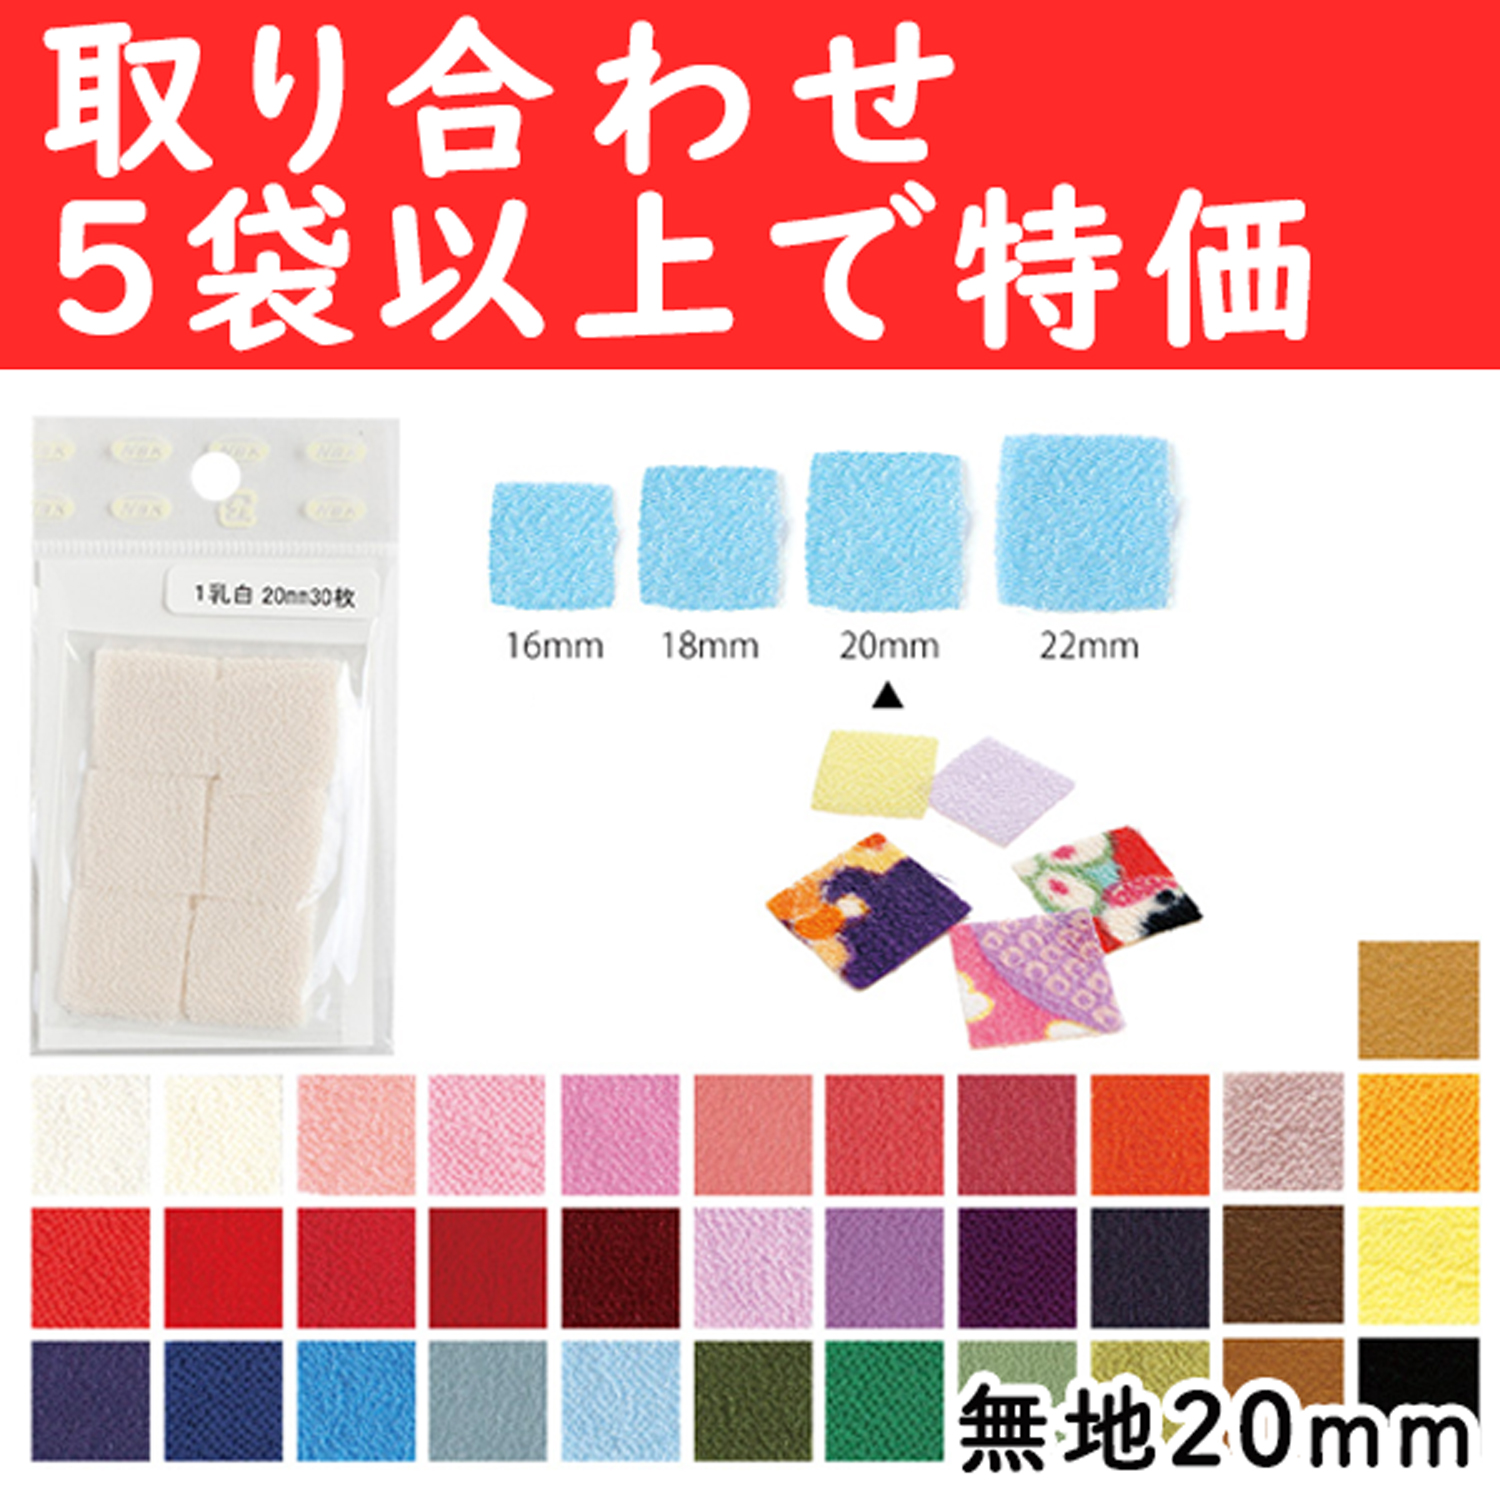 S50CH20-OVER5 Tsumami Crafting Crepe 20mm 30pcs over 5 pack more  (pack)